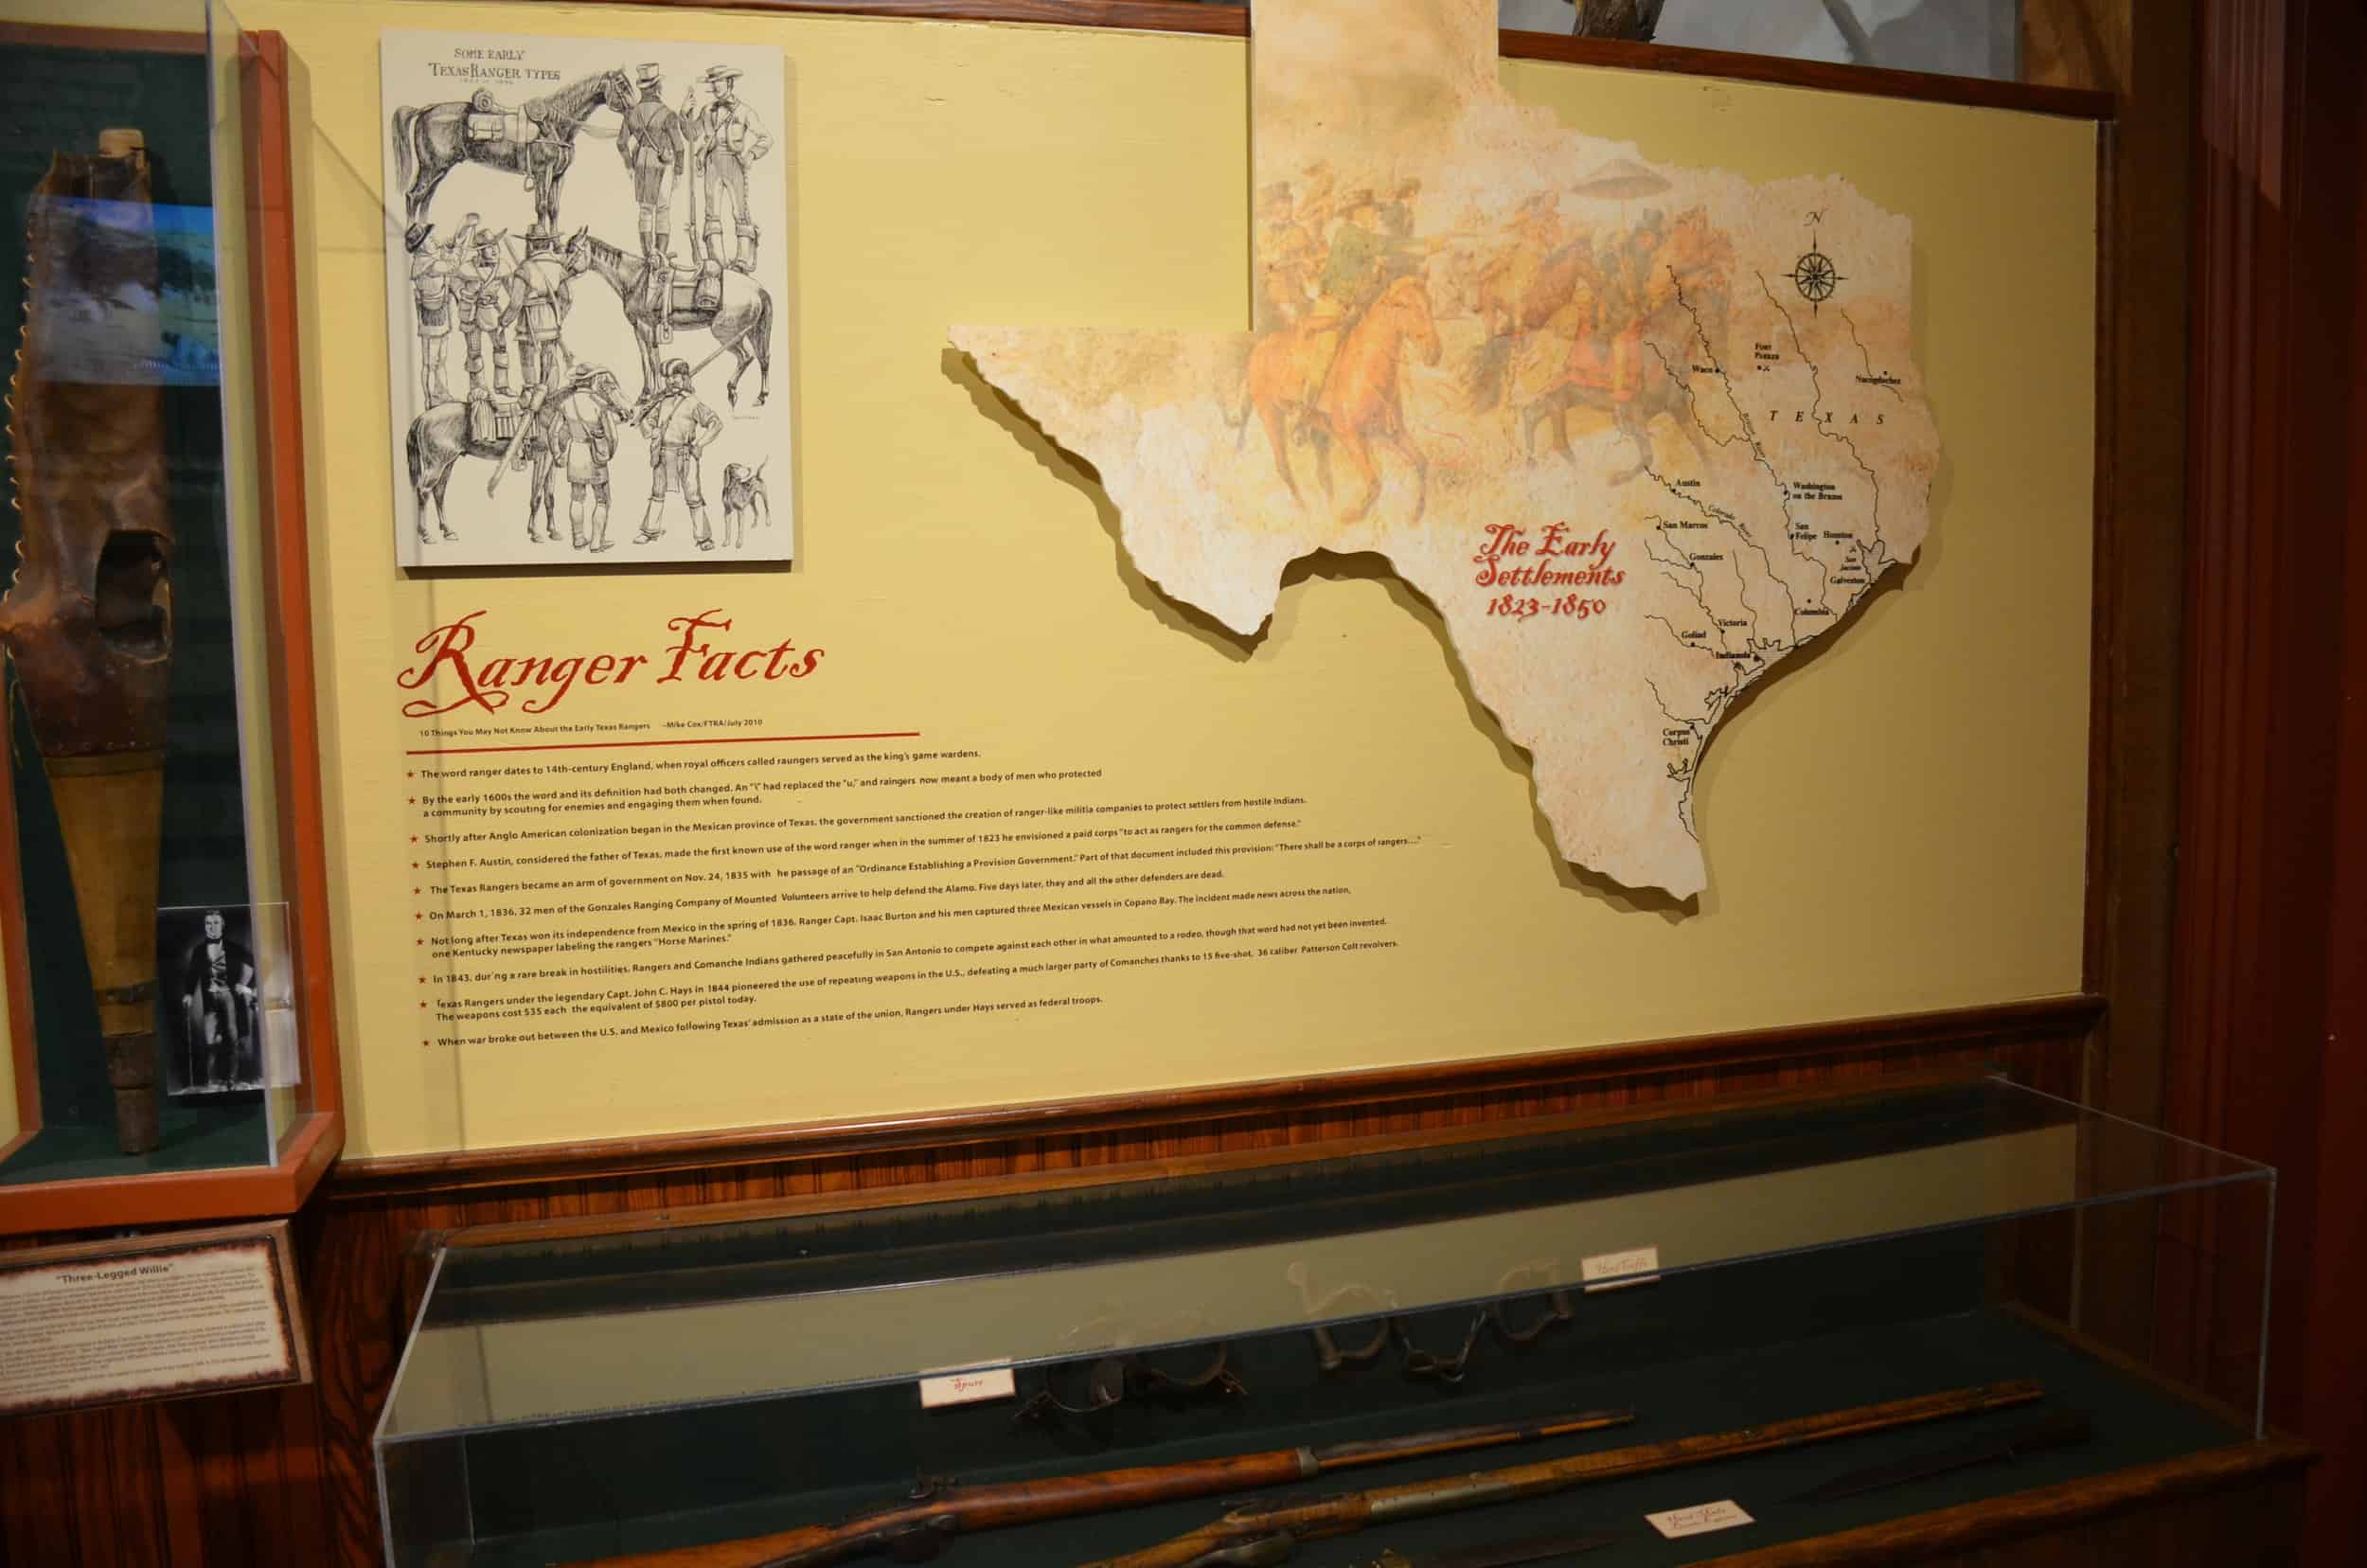 Facts about the Texas Rangers at the Texas Ranger Museum